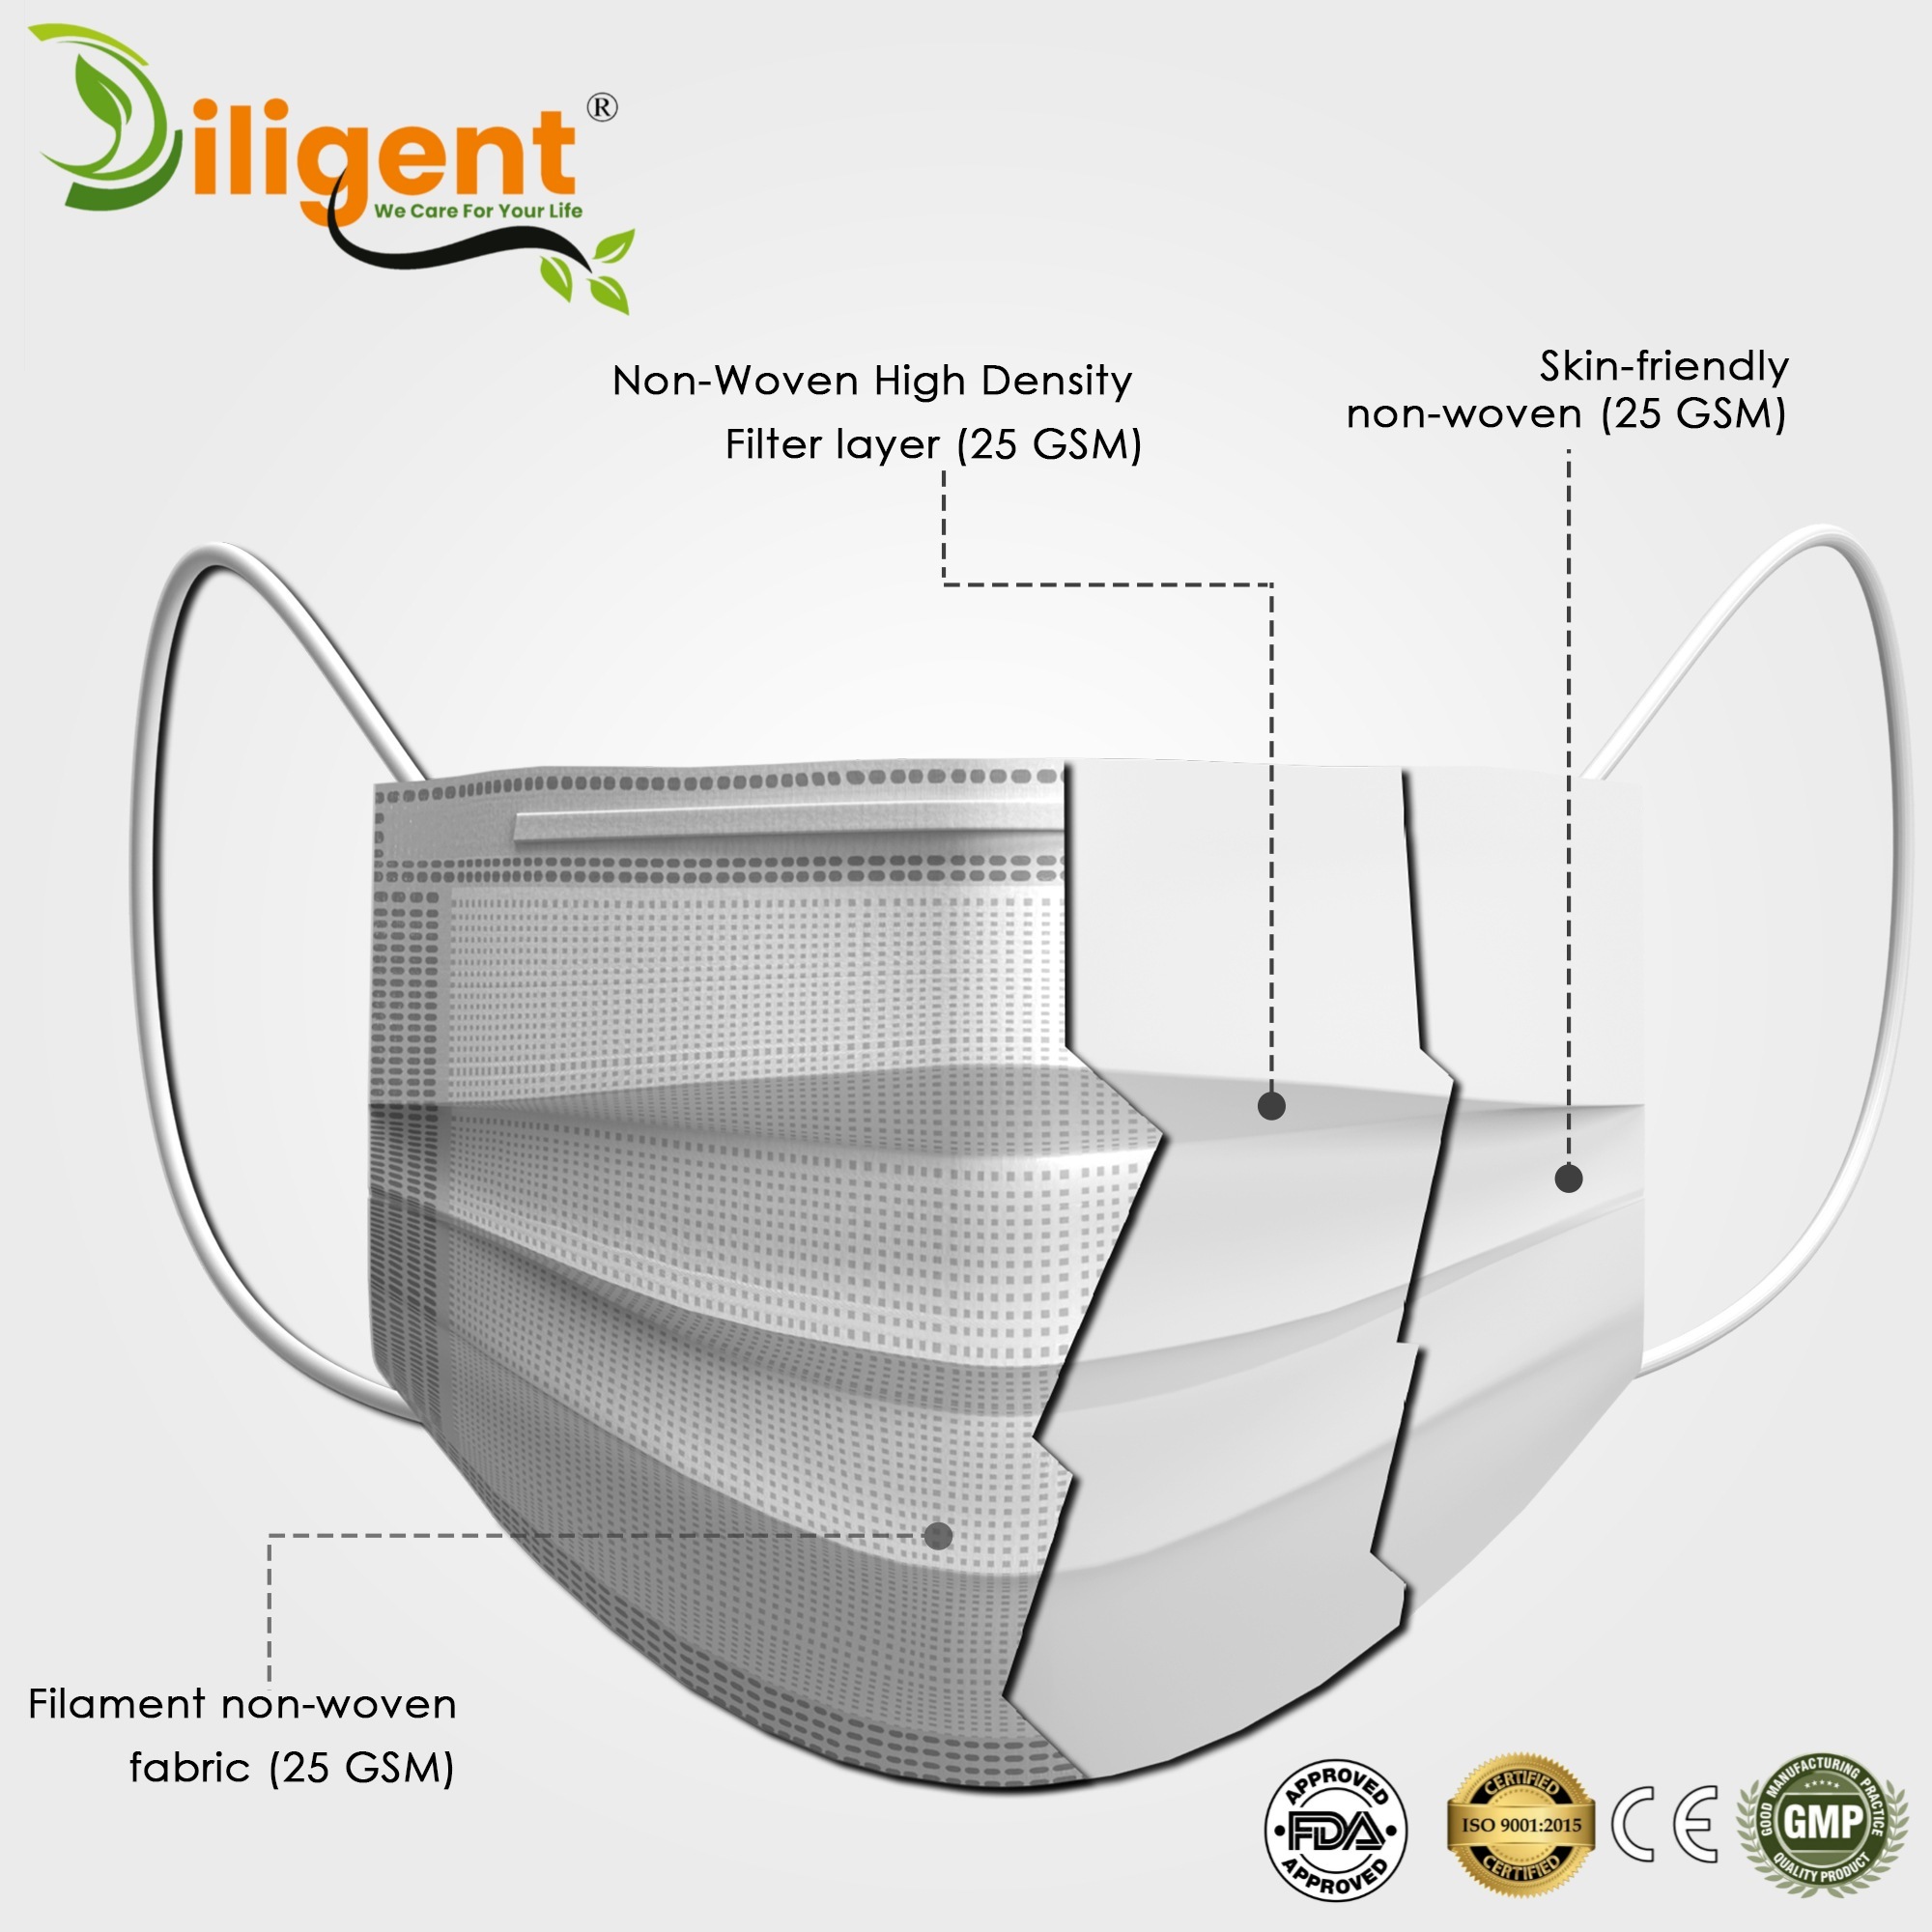 White 3Ply Surgical Mask Certified By FDA,CE,WHO-GMP & ISO